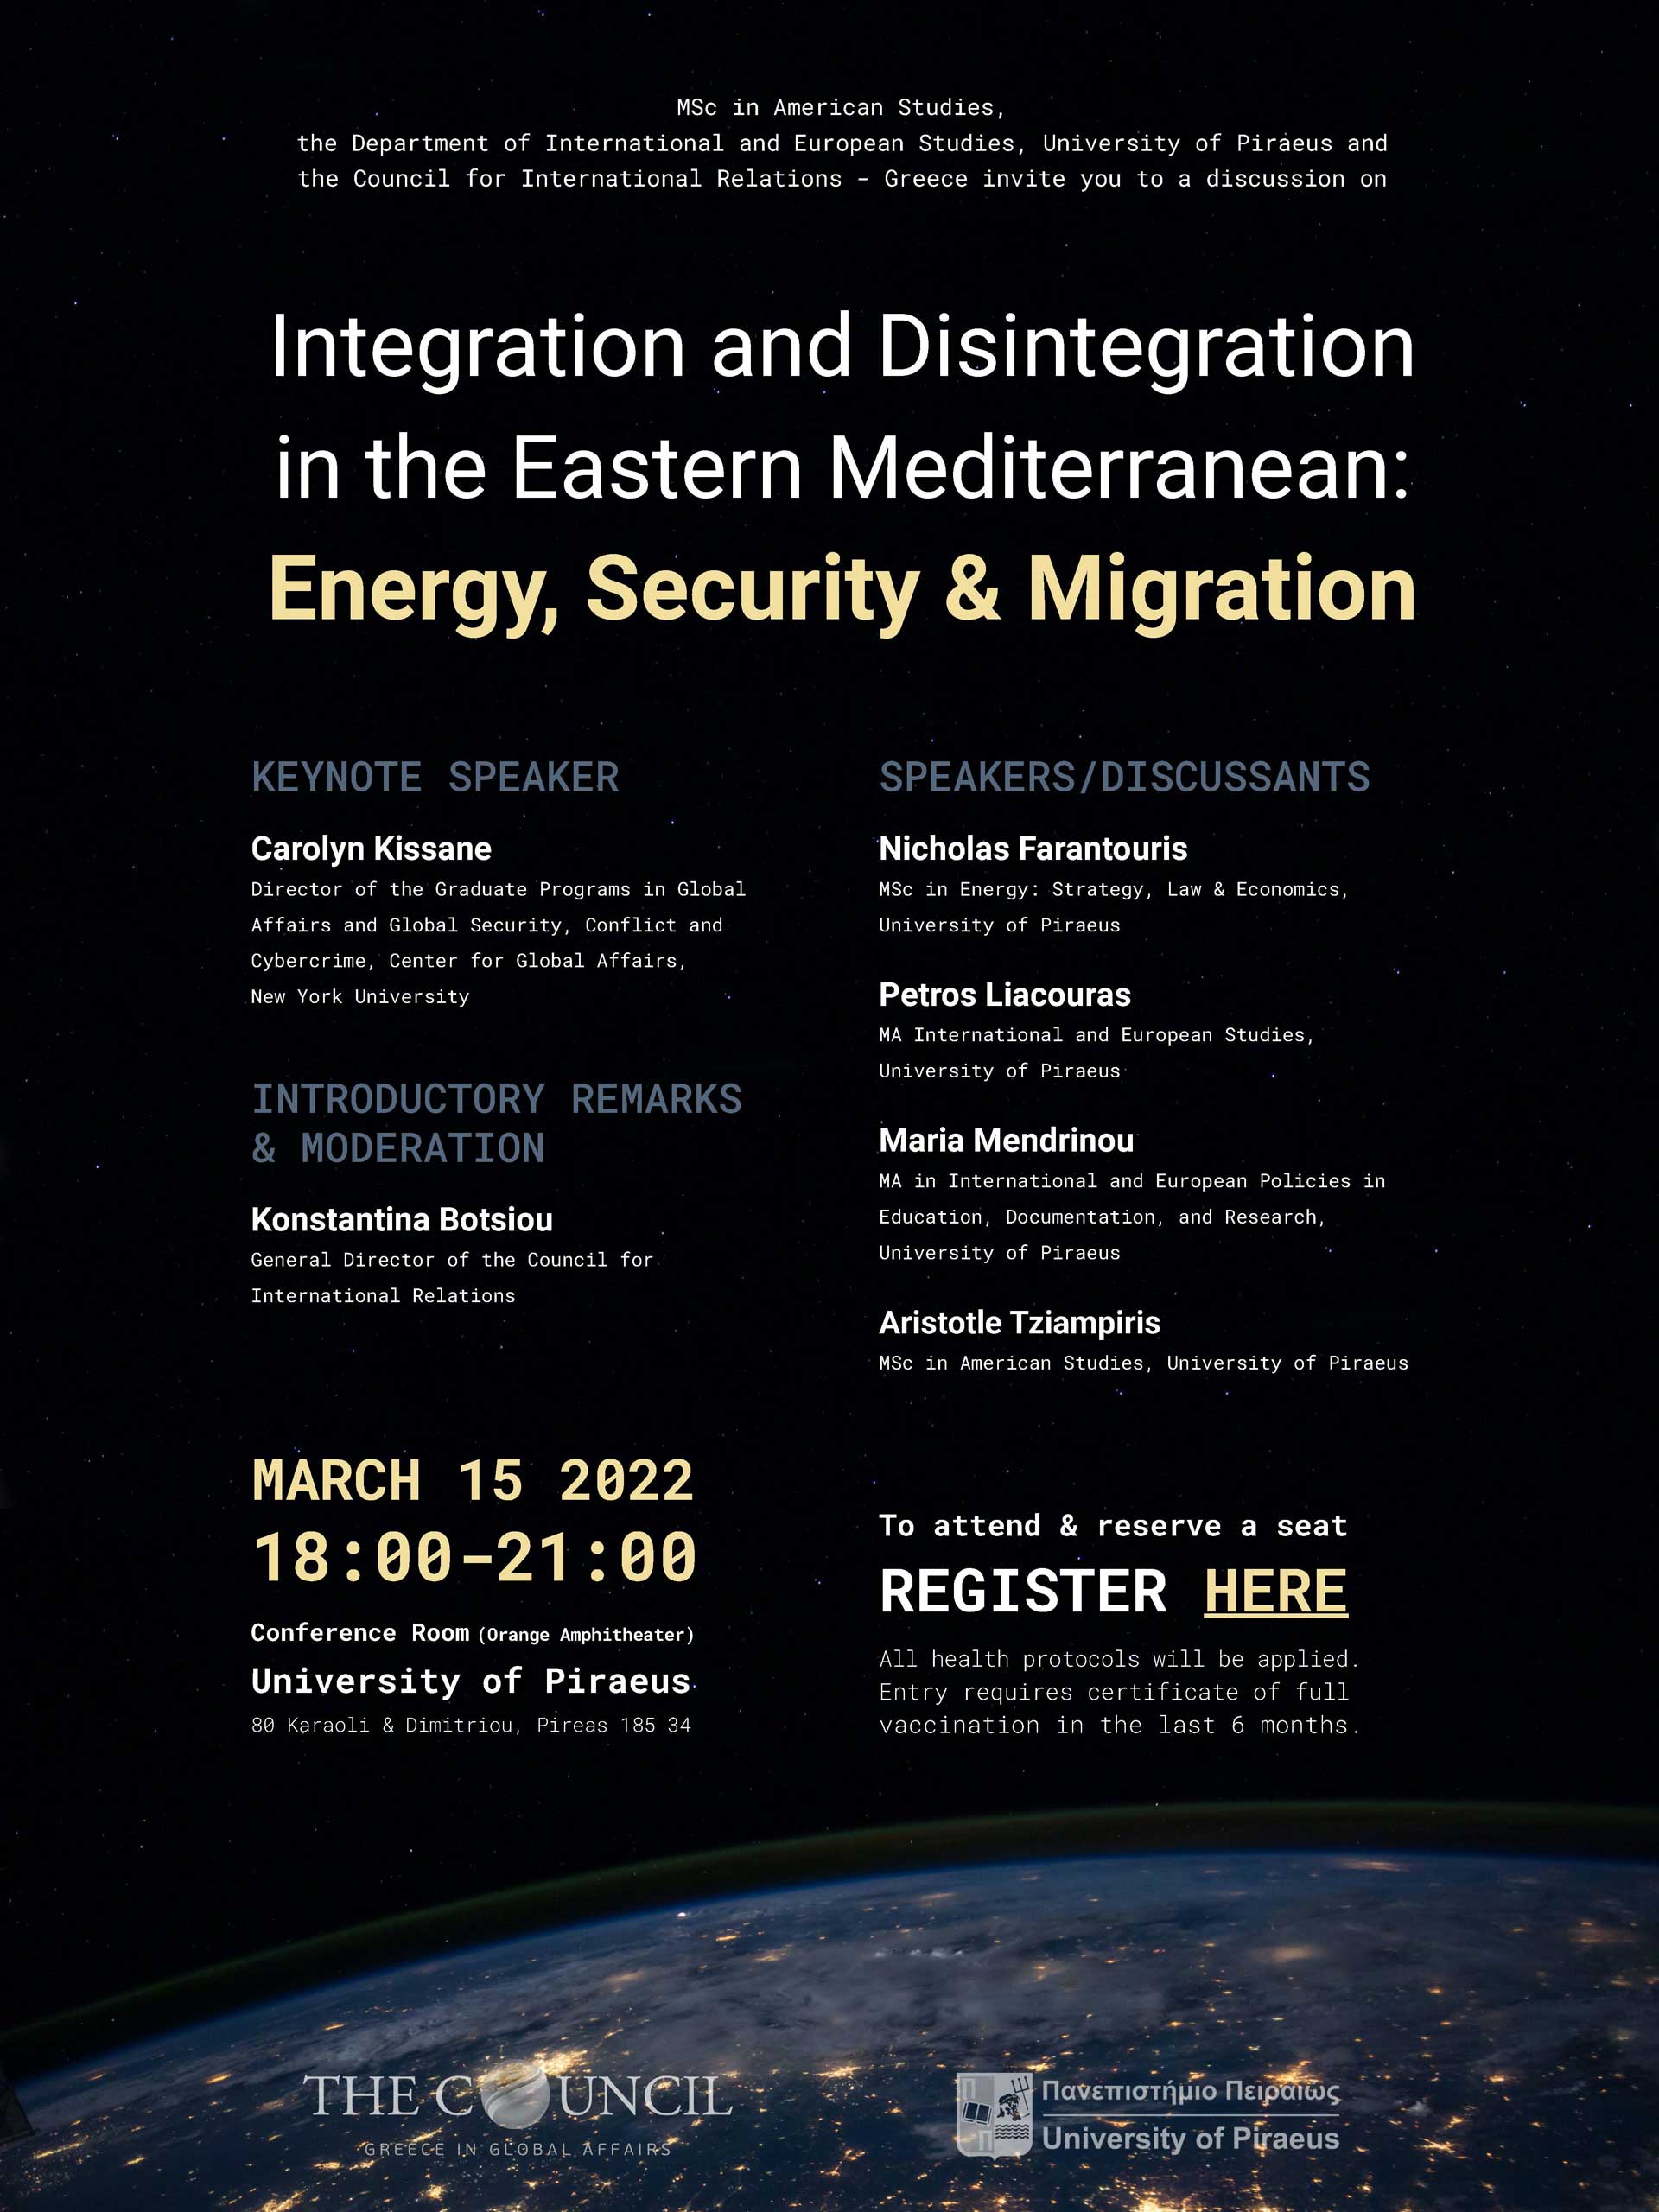 Energy Security Migration